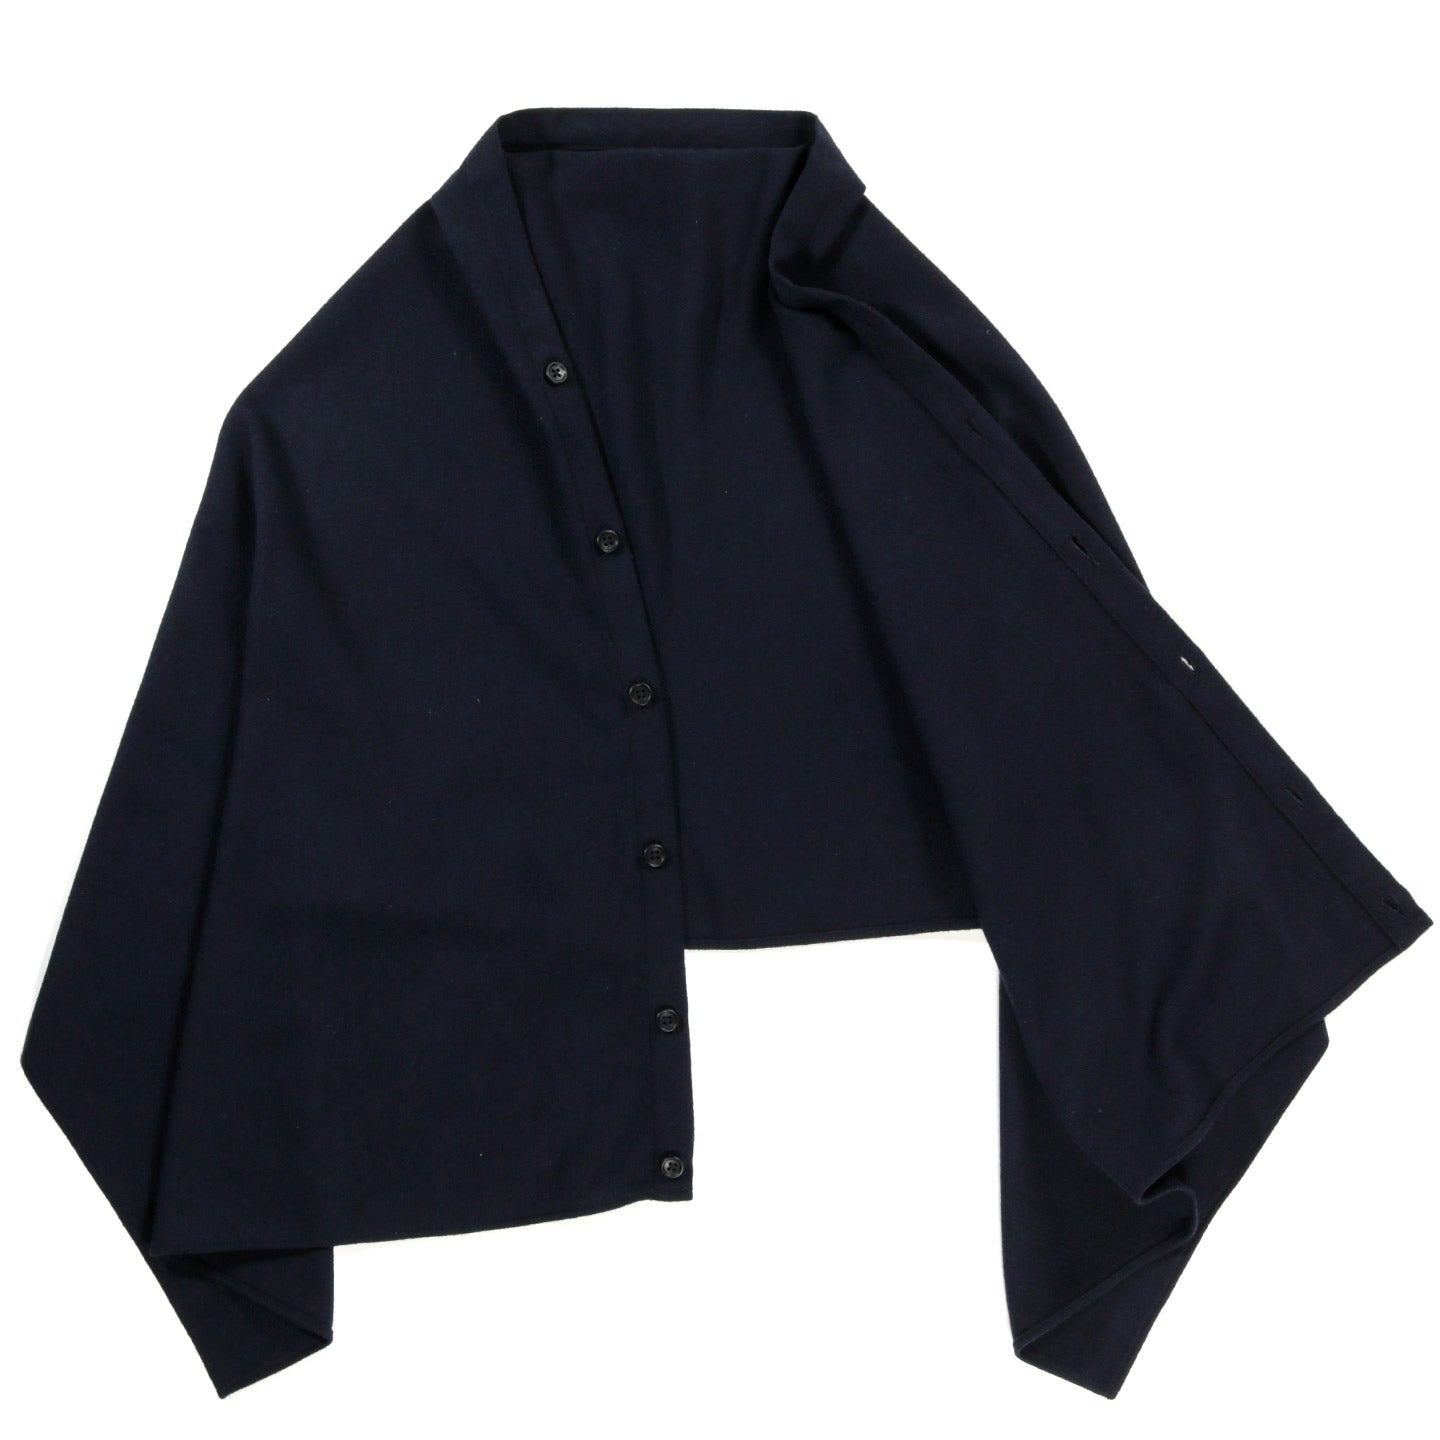 ENGINEERED GARMENTS BUTTON SHAWL NAVY SOLID POLY WOOL FLANNEL